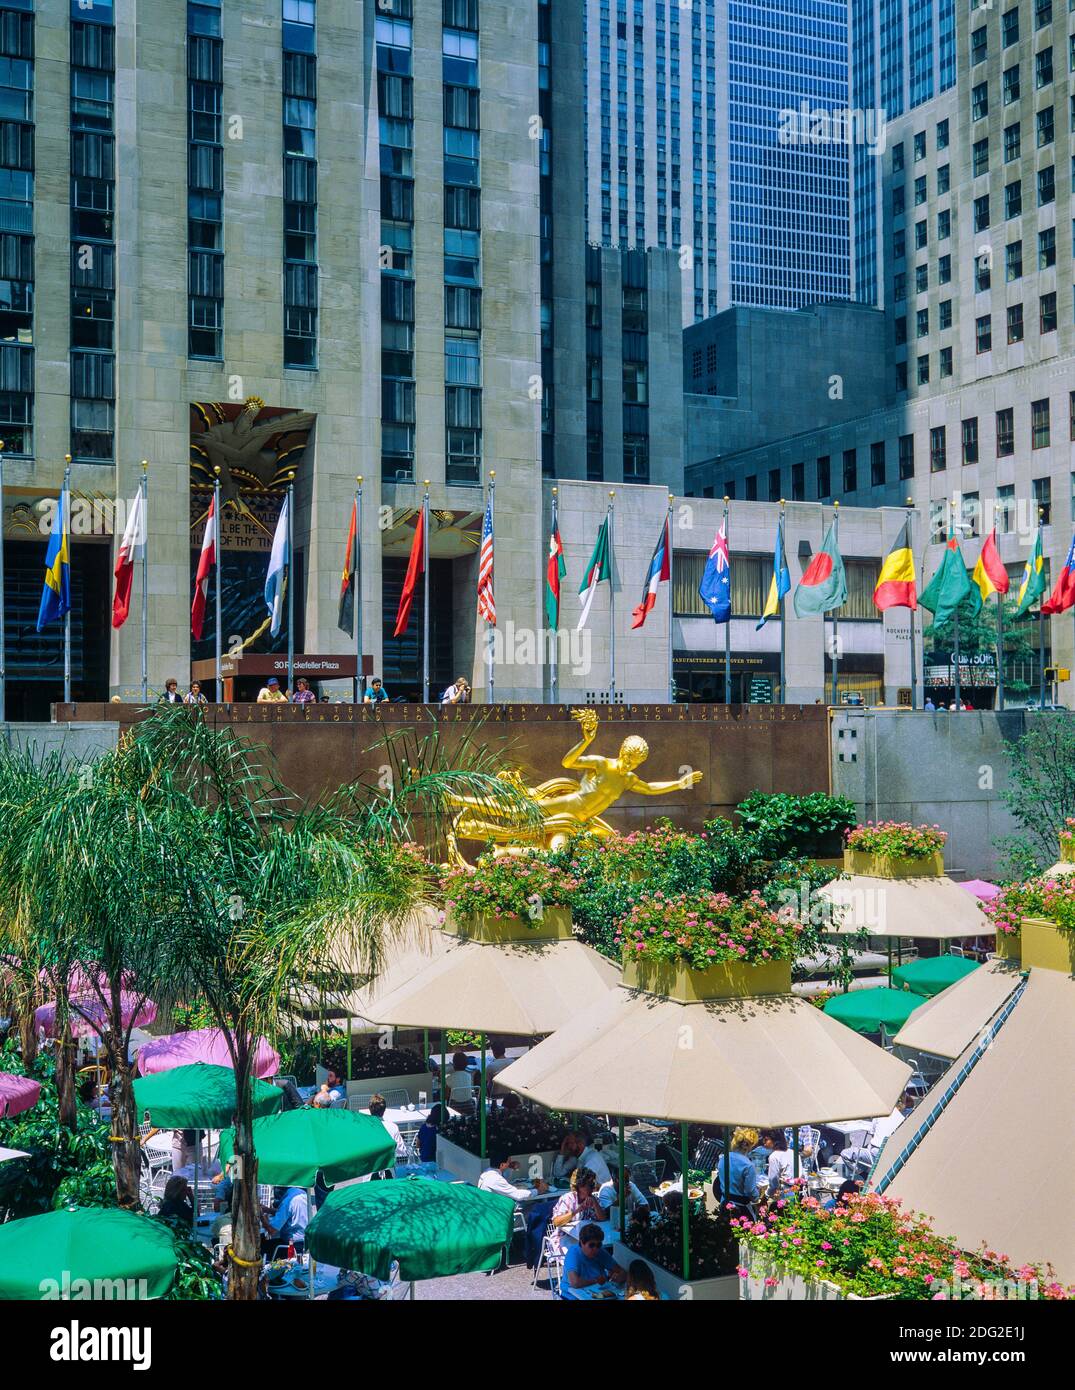 New York 1985, Rockefeller Center Plaza, Rink bar, restaurant, cafe terrace, Prometheus golden statue, flags from all countries, Manhattan, New york City, NY, NYC, USA Stock Photo